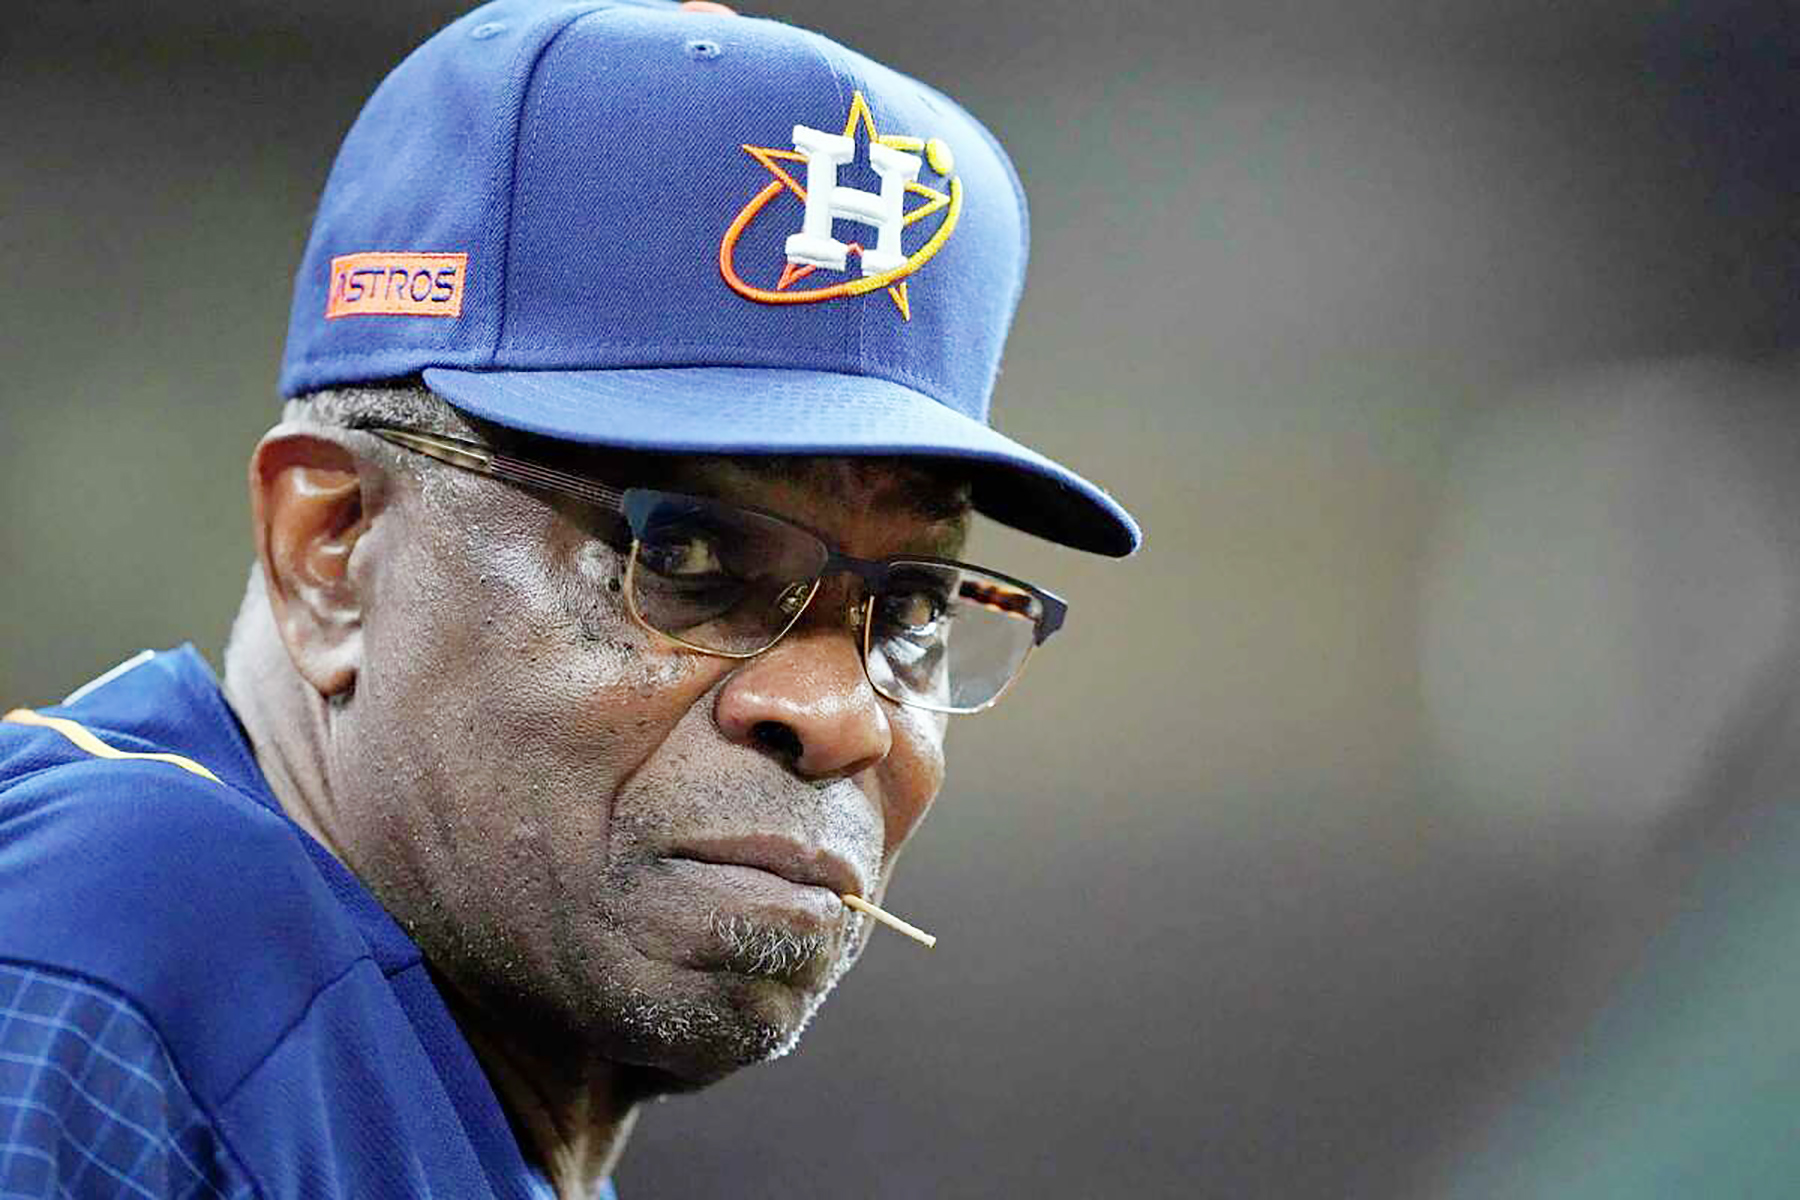 Dusty Baker has come full circle and deserves a ring